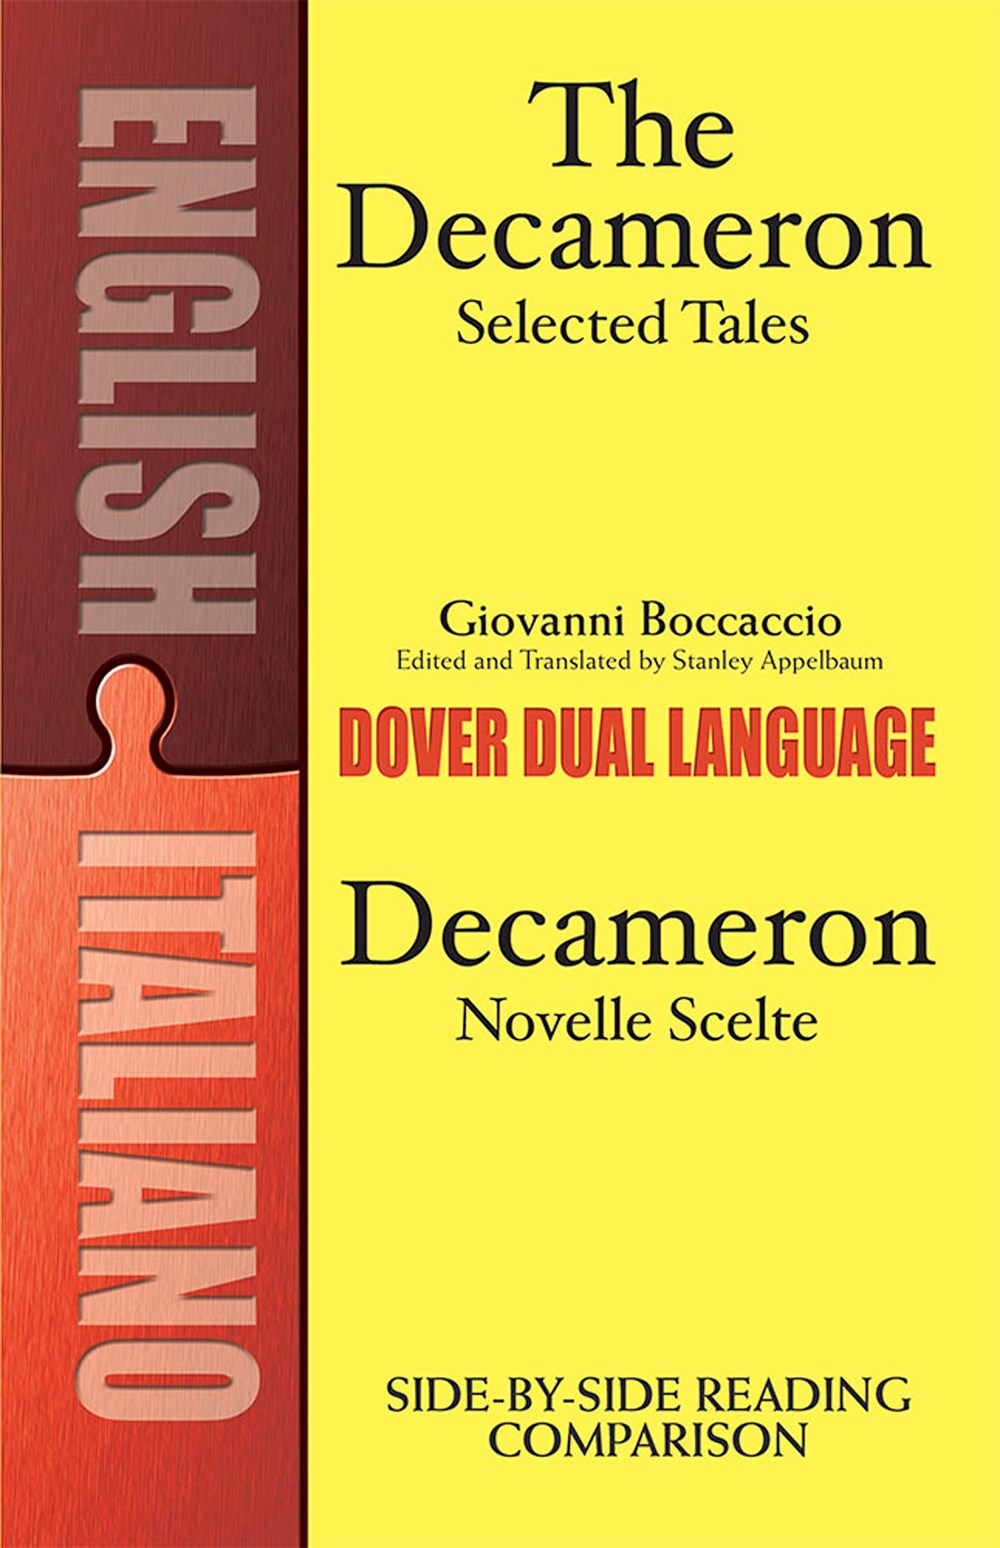 Decameron Selected Tales / Decameron Novelle Scelte